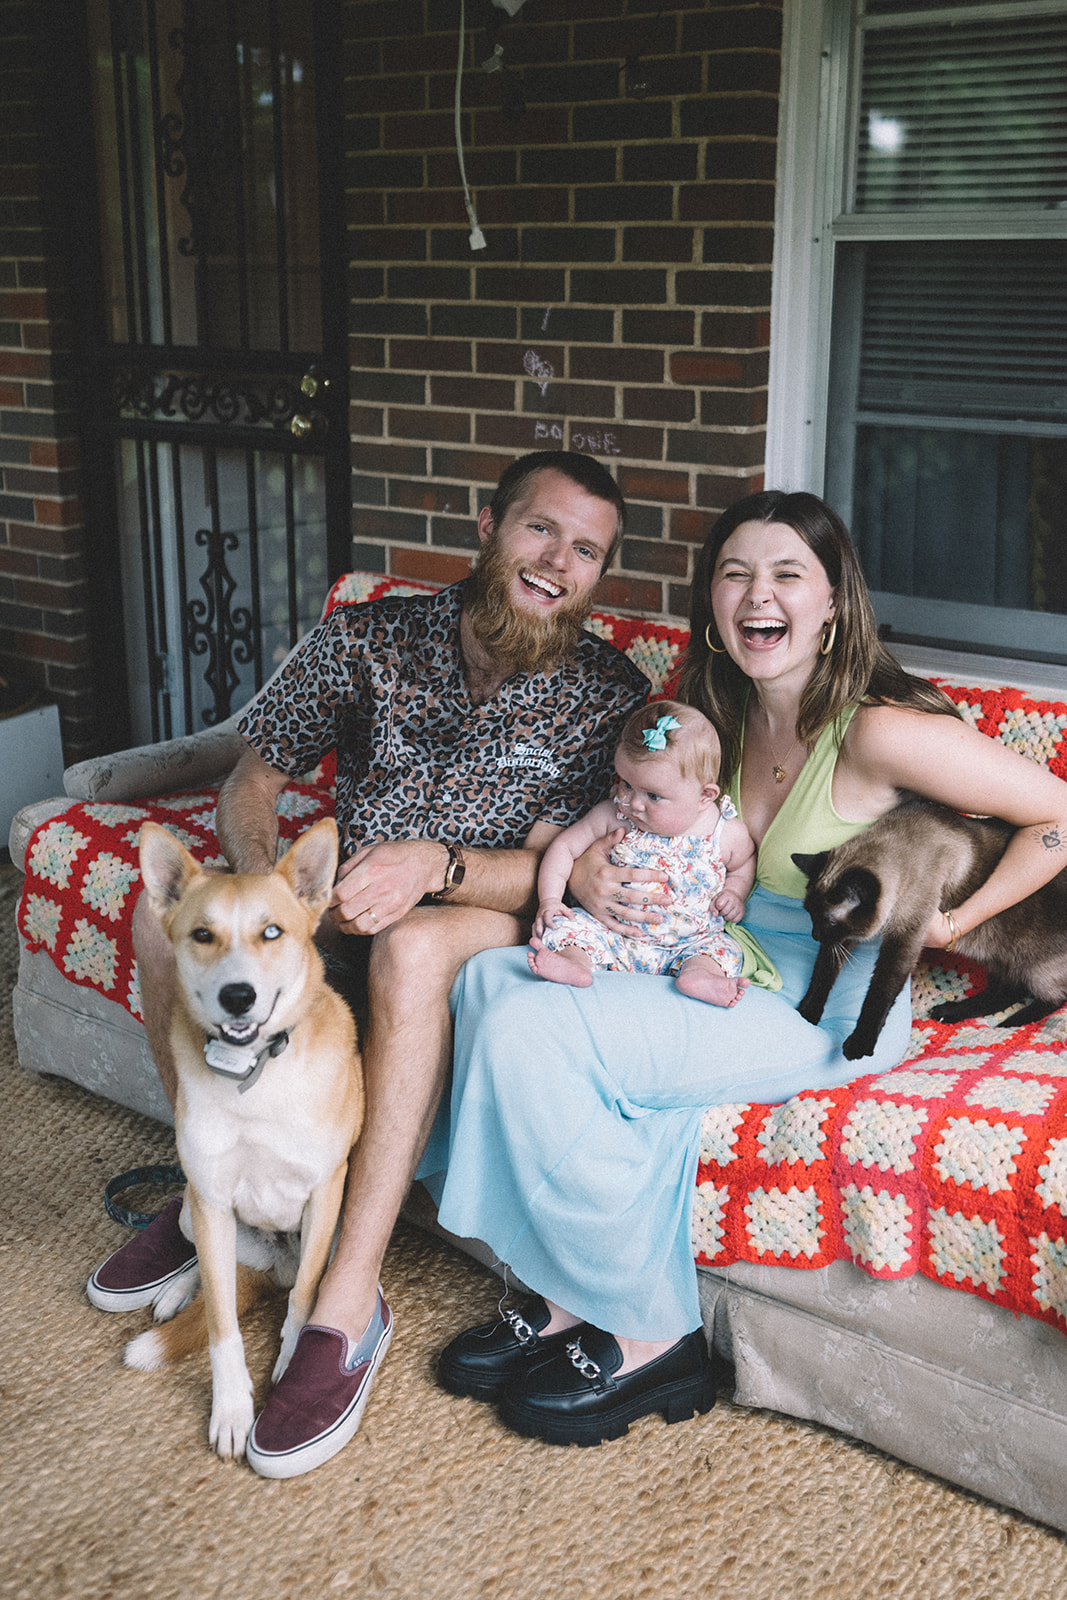 The Smiths in-home family photography session in Alabama